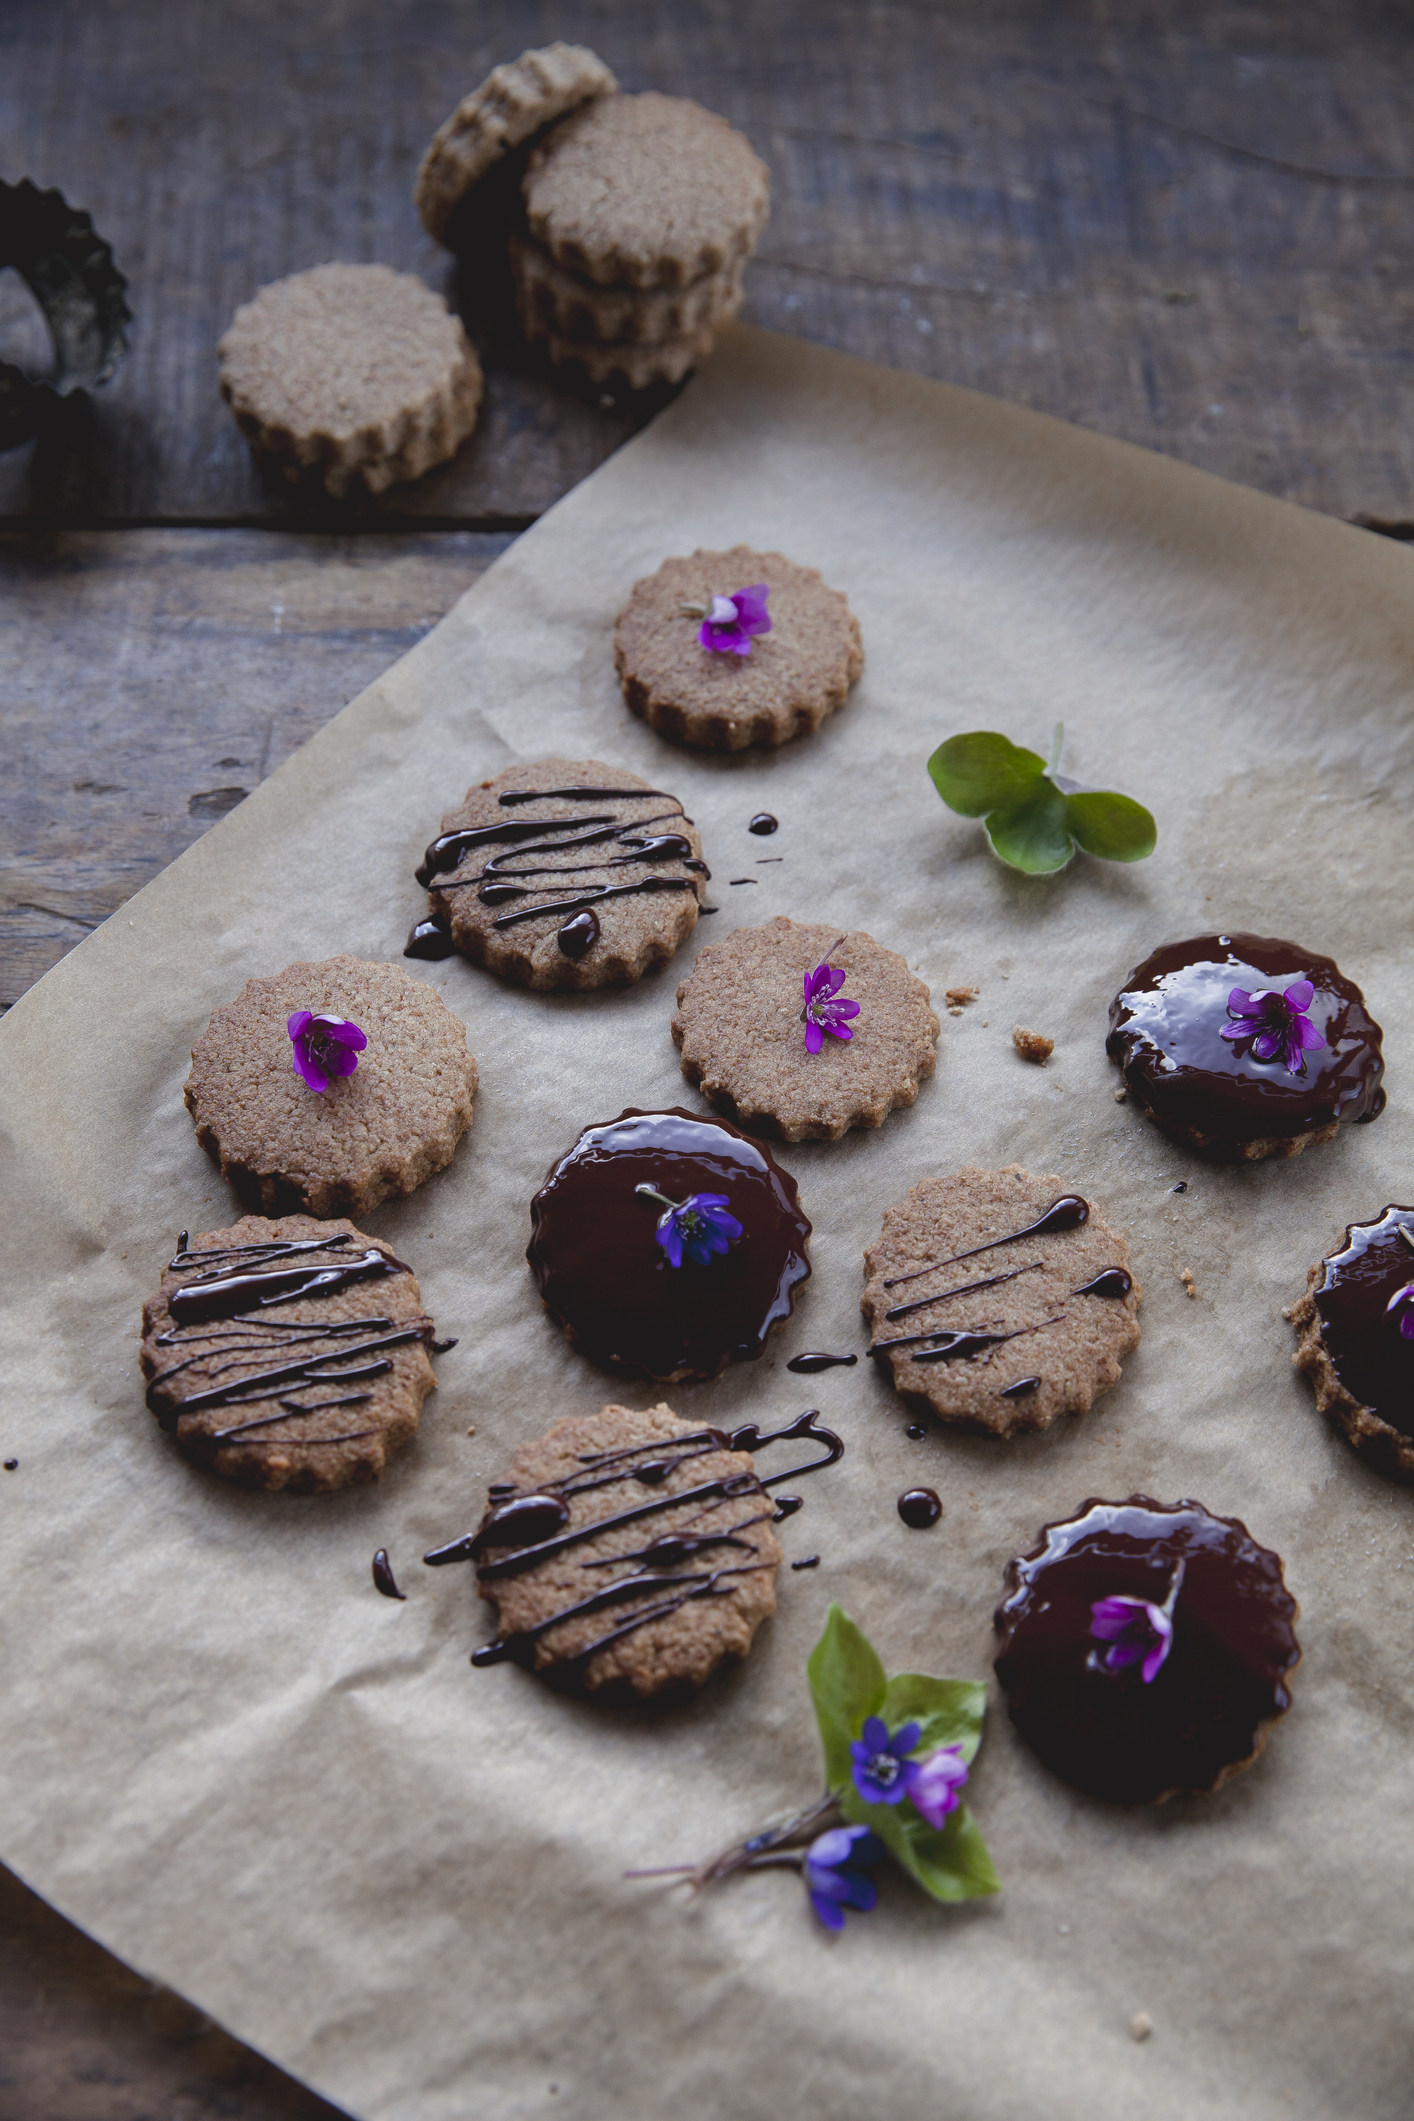 Homemade cookies decorated with chocolate and spring flowers